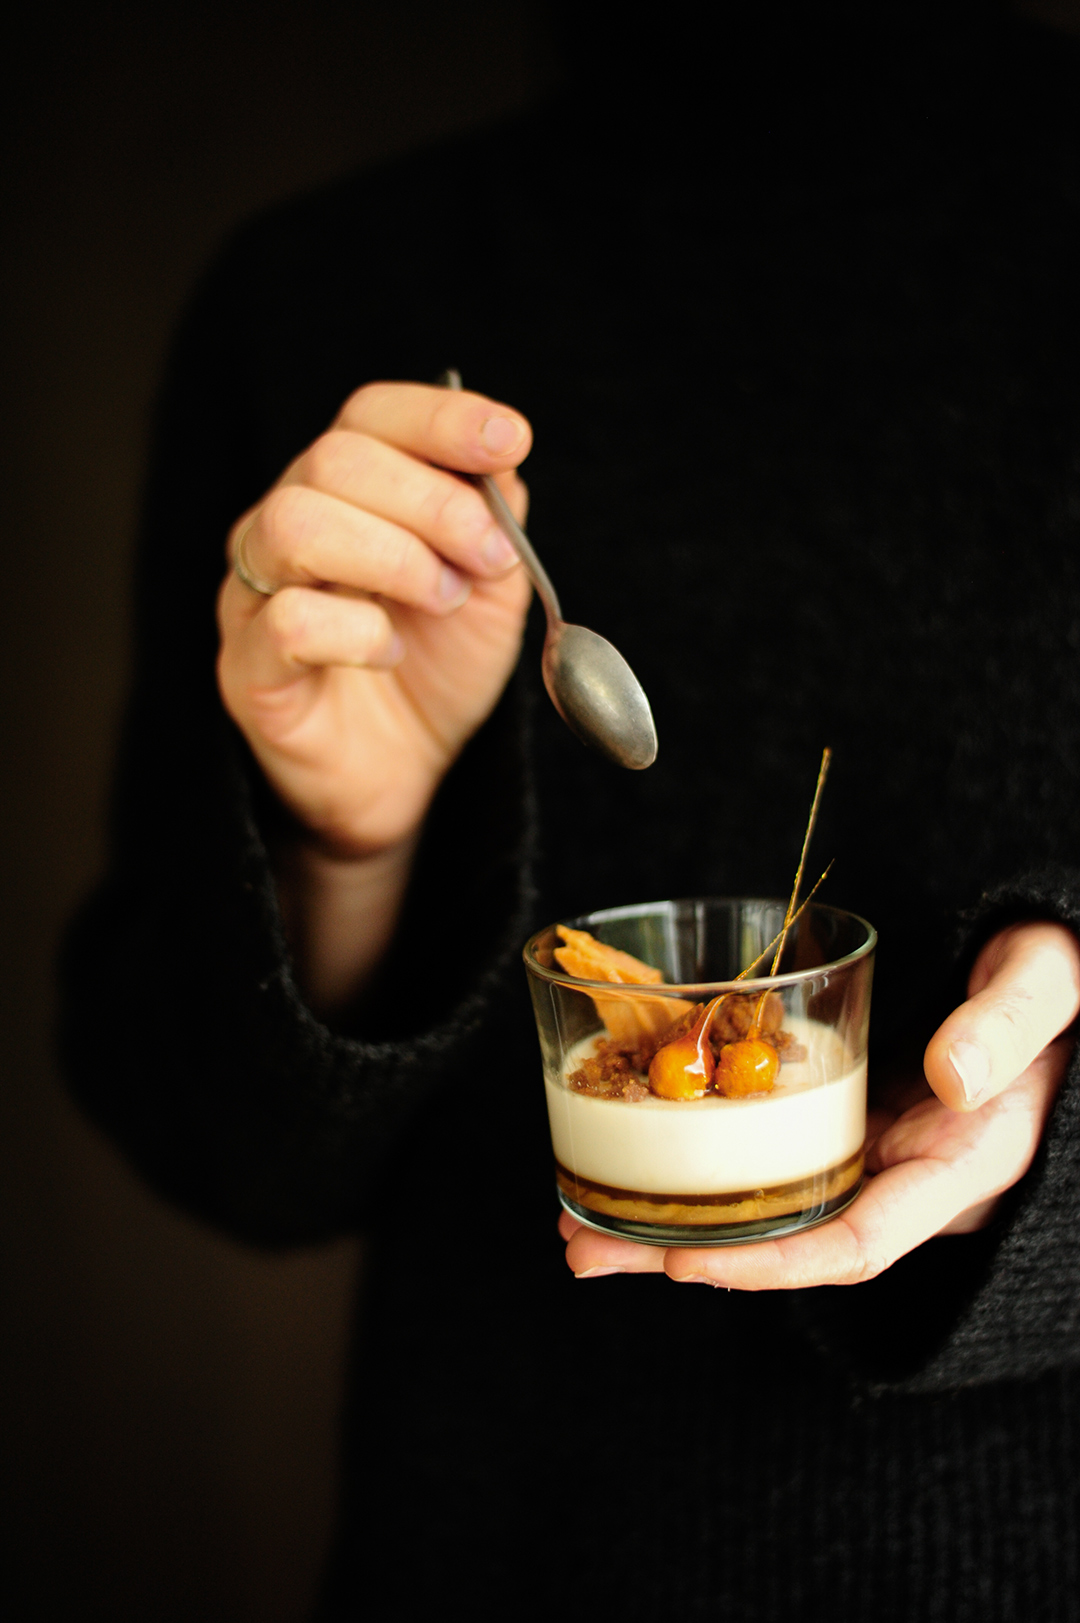 serving dumplings | Panna cotta with cookie milk and salted caramel